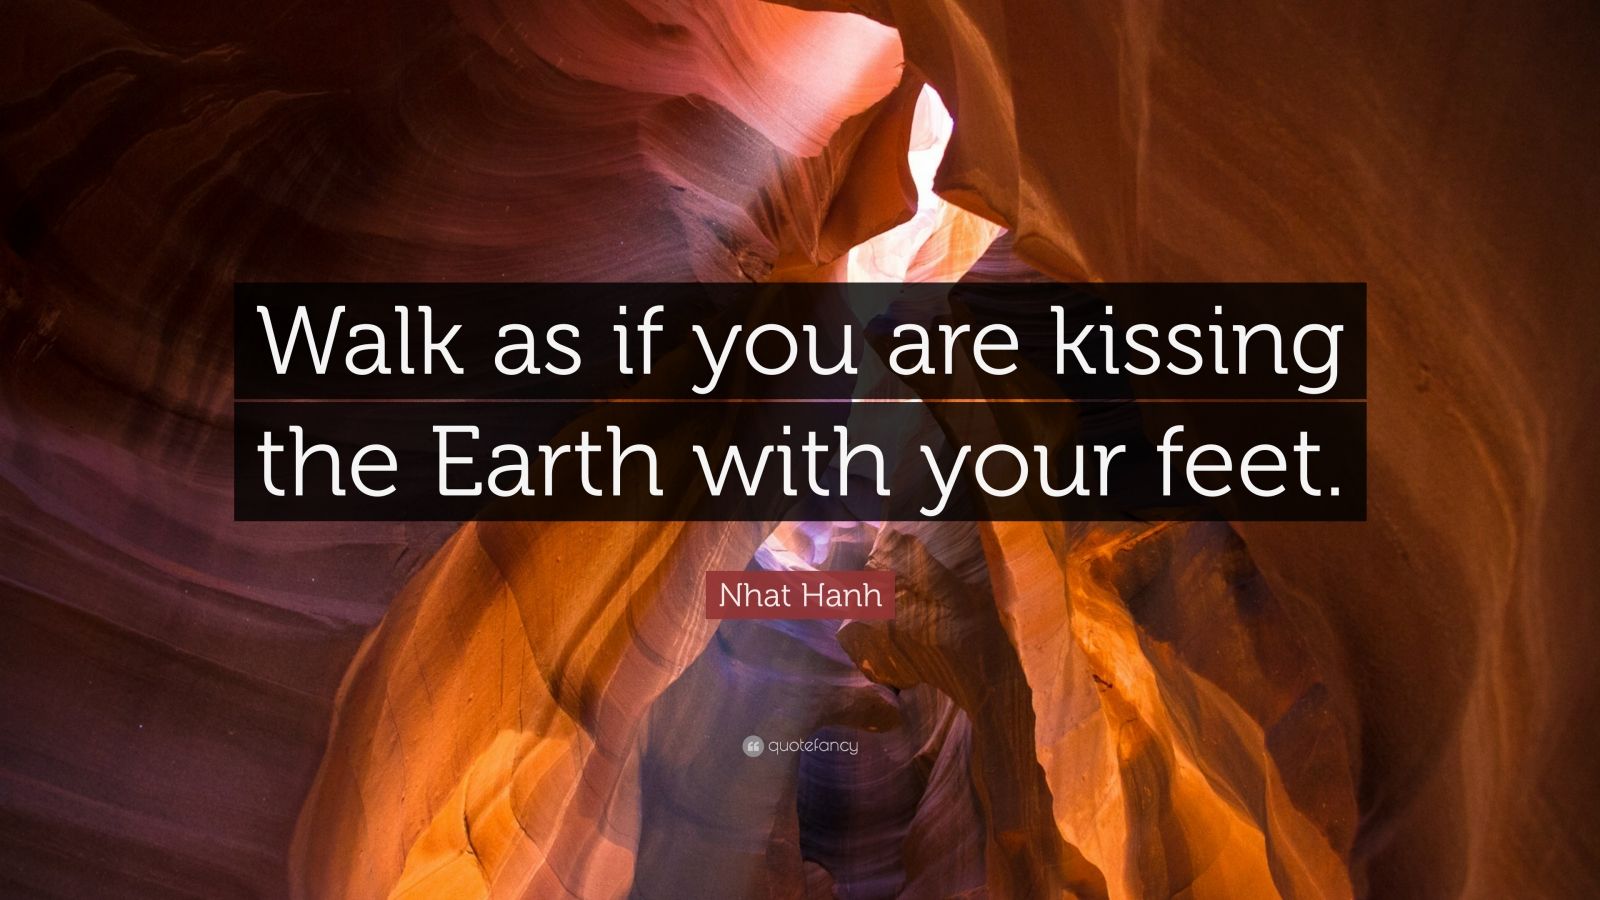 Nhat Hanh Quote: “Walk as if you are kissing the Earth with your feet ...